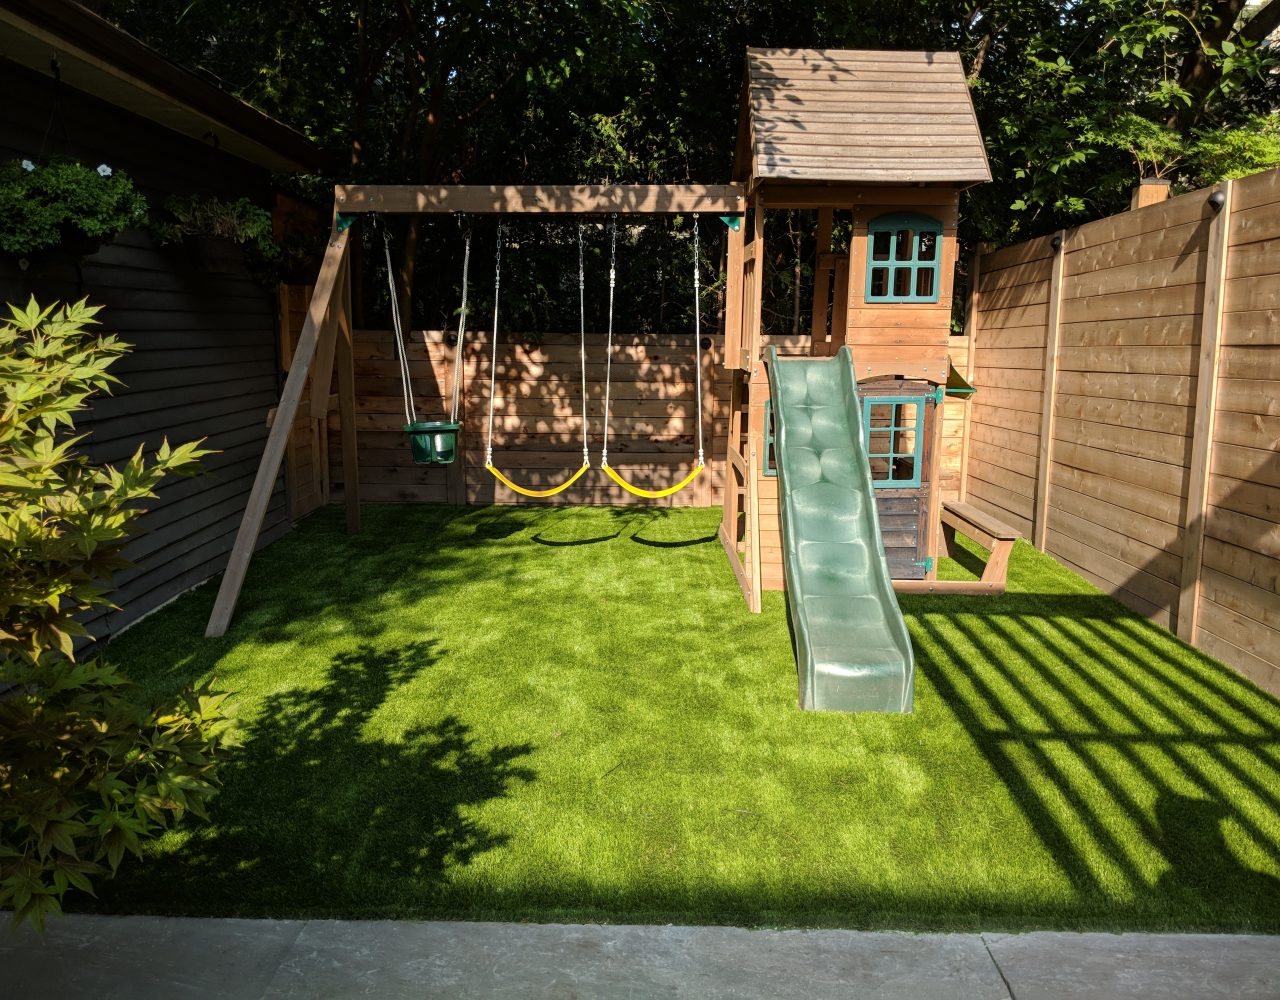 Let the kids swing without ripping up the grass